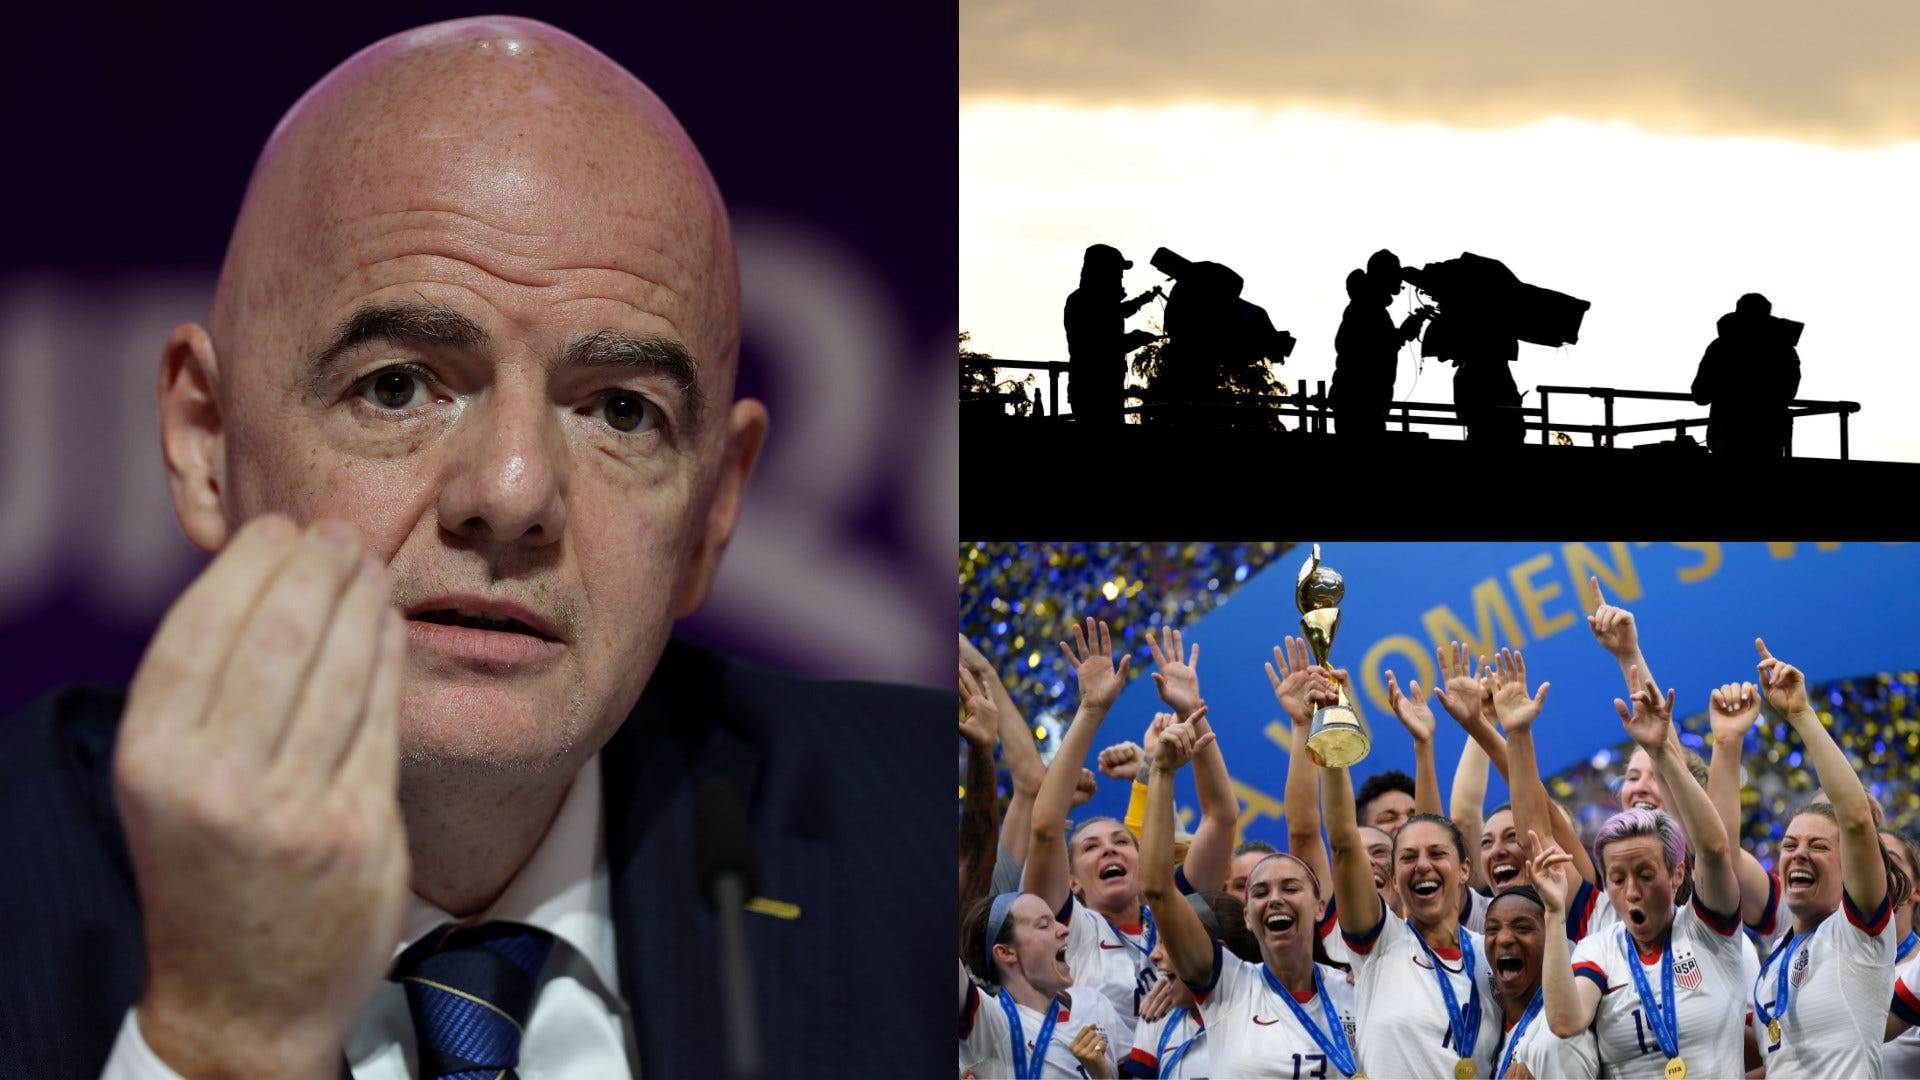 Womens World Cup 2023 Governments of Britain, Germany, Spain, Italy and France urge FIFA and TV broadcasters to urgently reach agreement after Gianni Infantino blackout threat Goal US